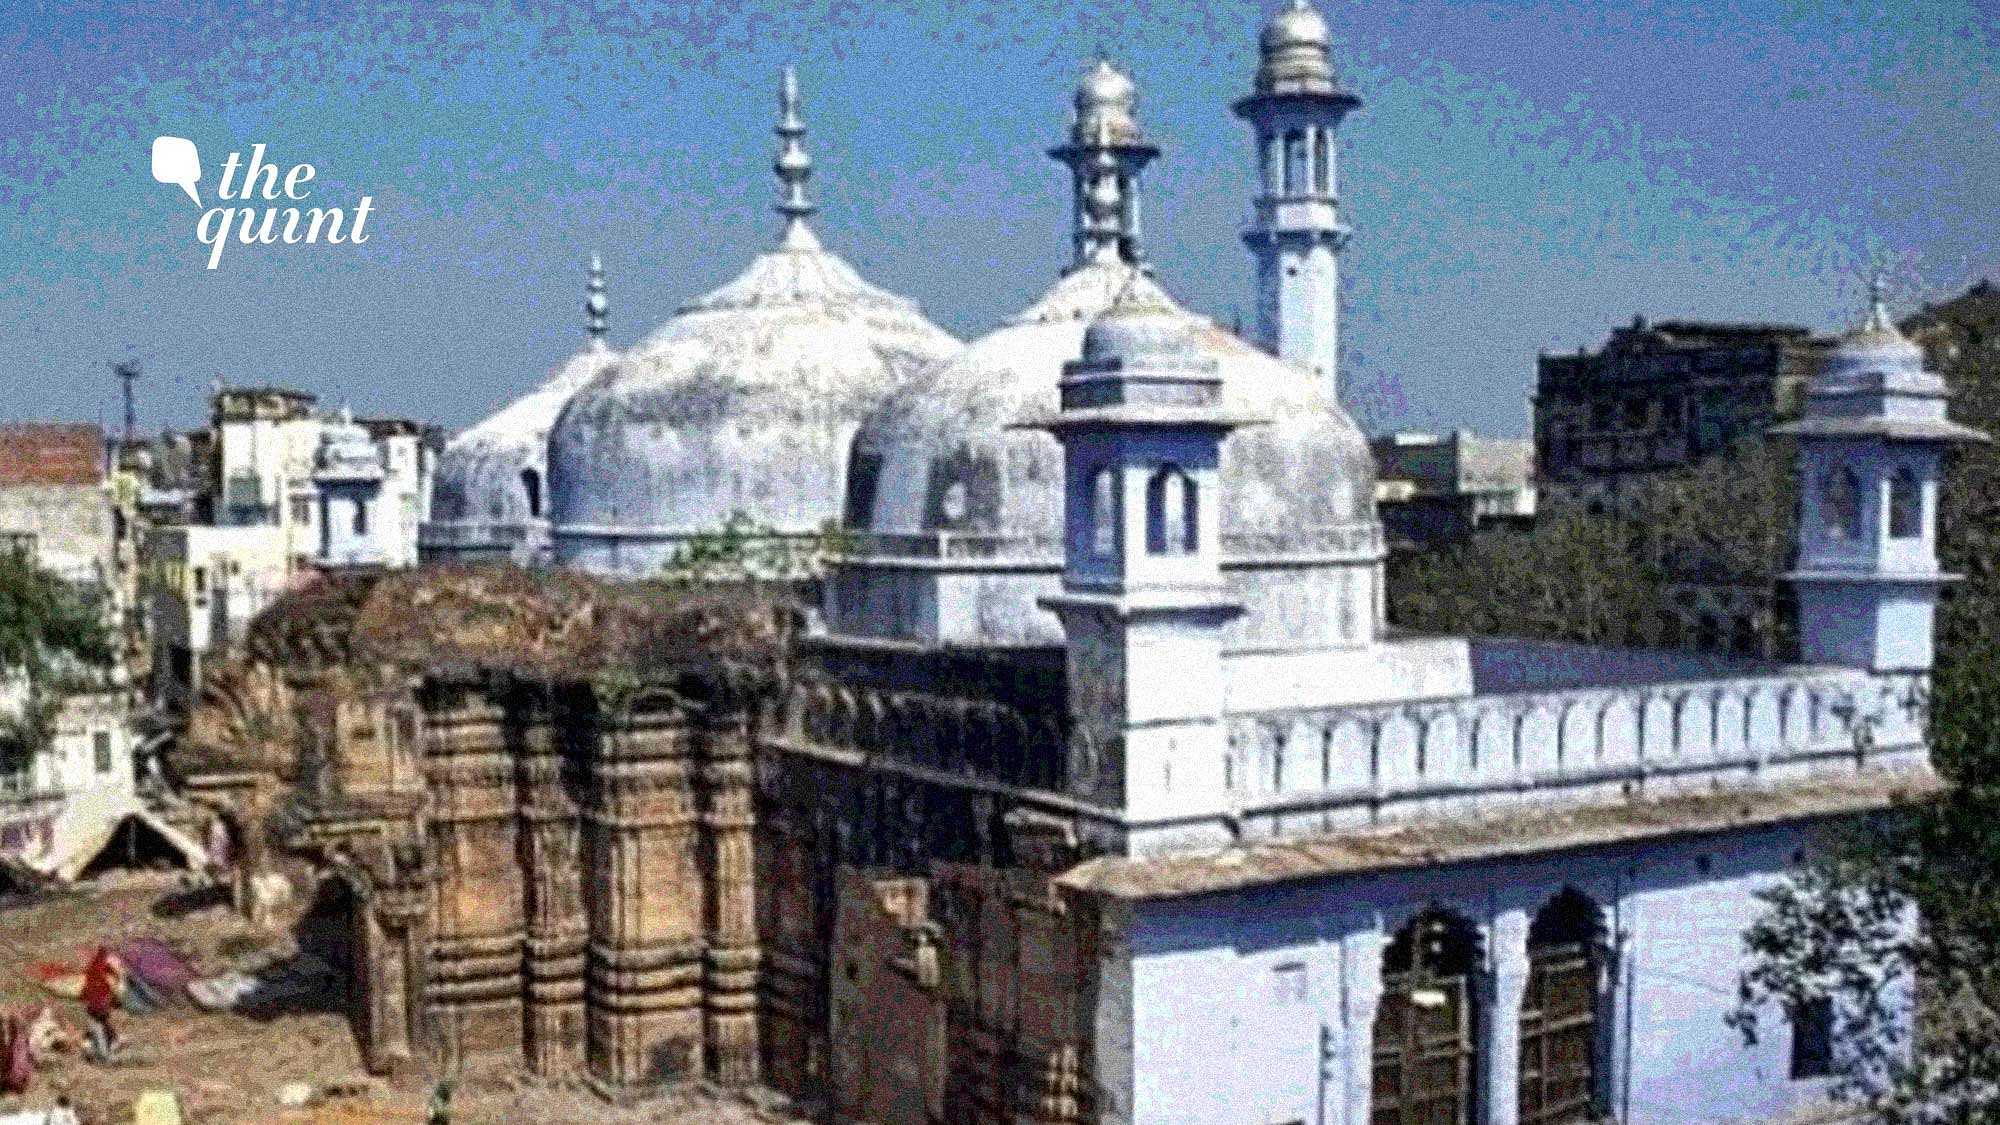 “The status of Gyanvapi Masjid is, as such, beyond question,” the UP Sunni Central Waqf Board said.